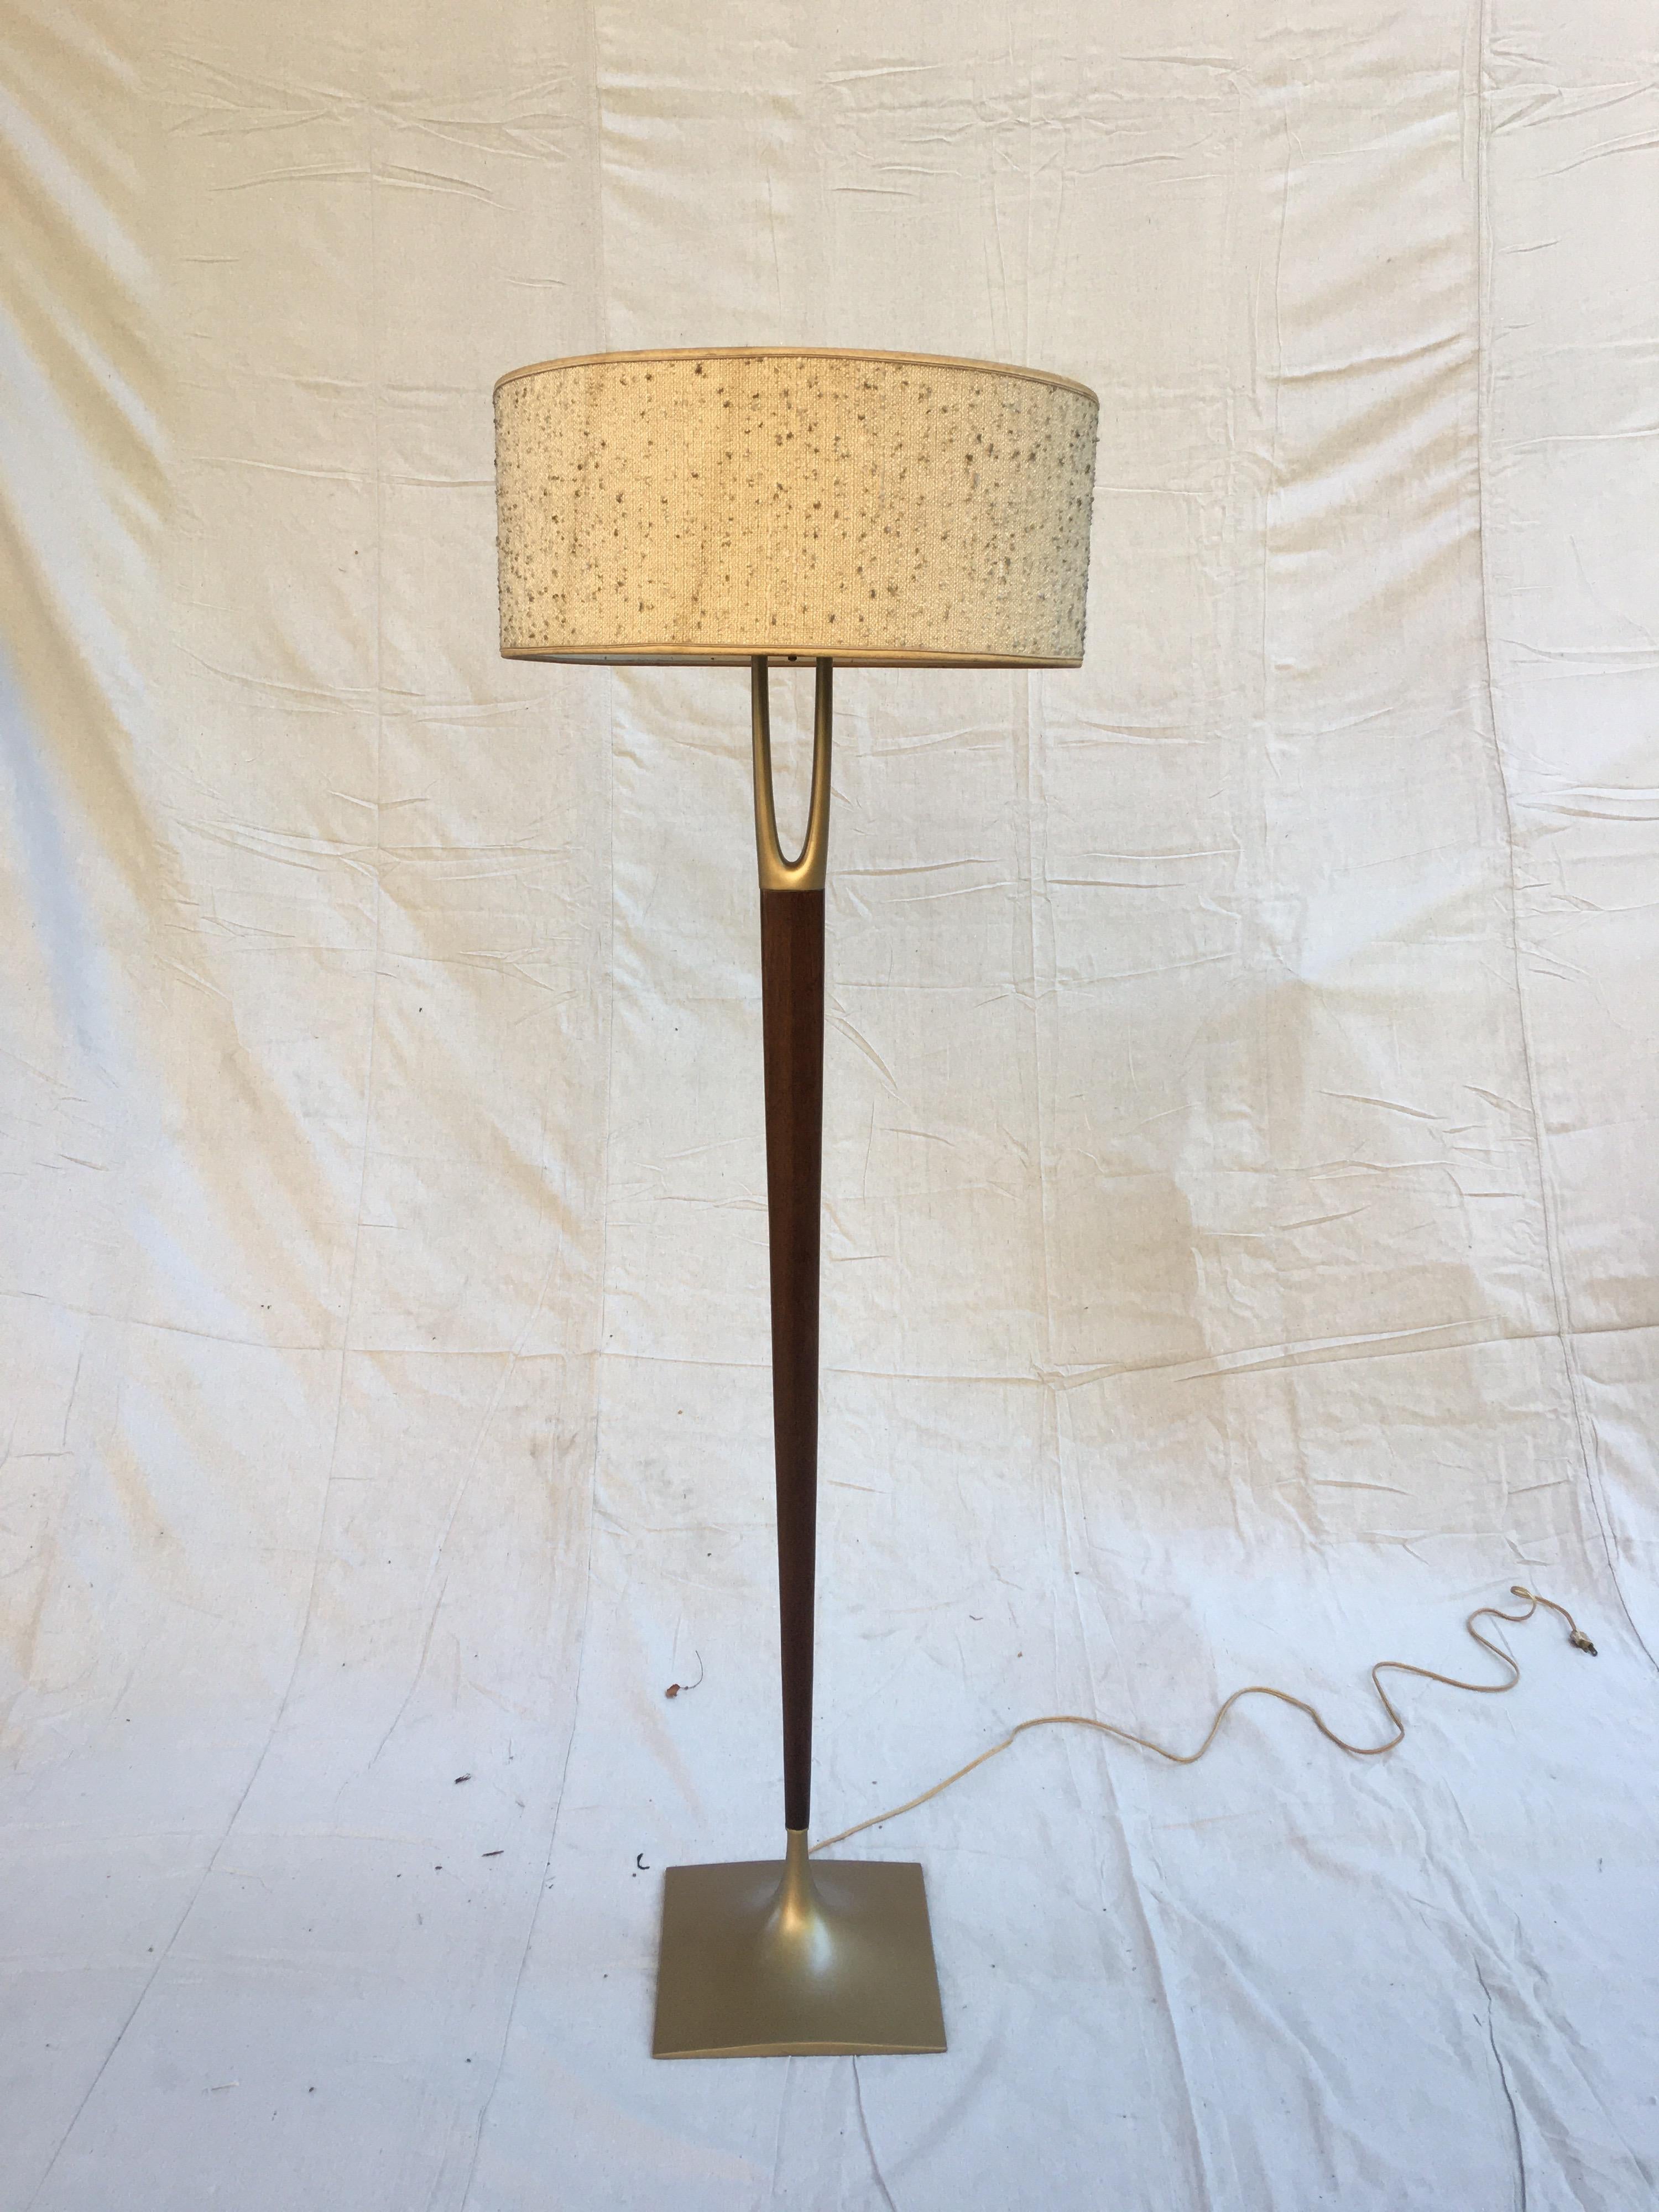 Classic 1950's  Wishbone floor lamp for Laurel Lighting Company. Original shade, does show a little staining as seen in photo. Base and wishbone has been resprayed in a brass tone finish. All looks very clean, but original I believe is a little